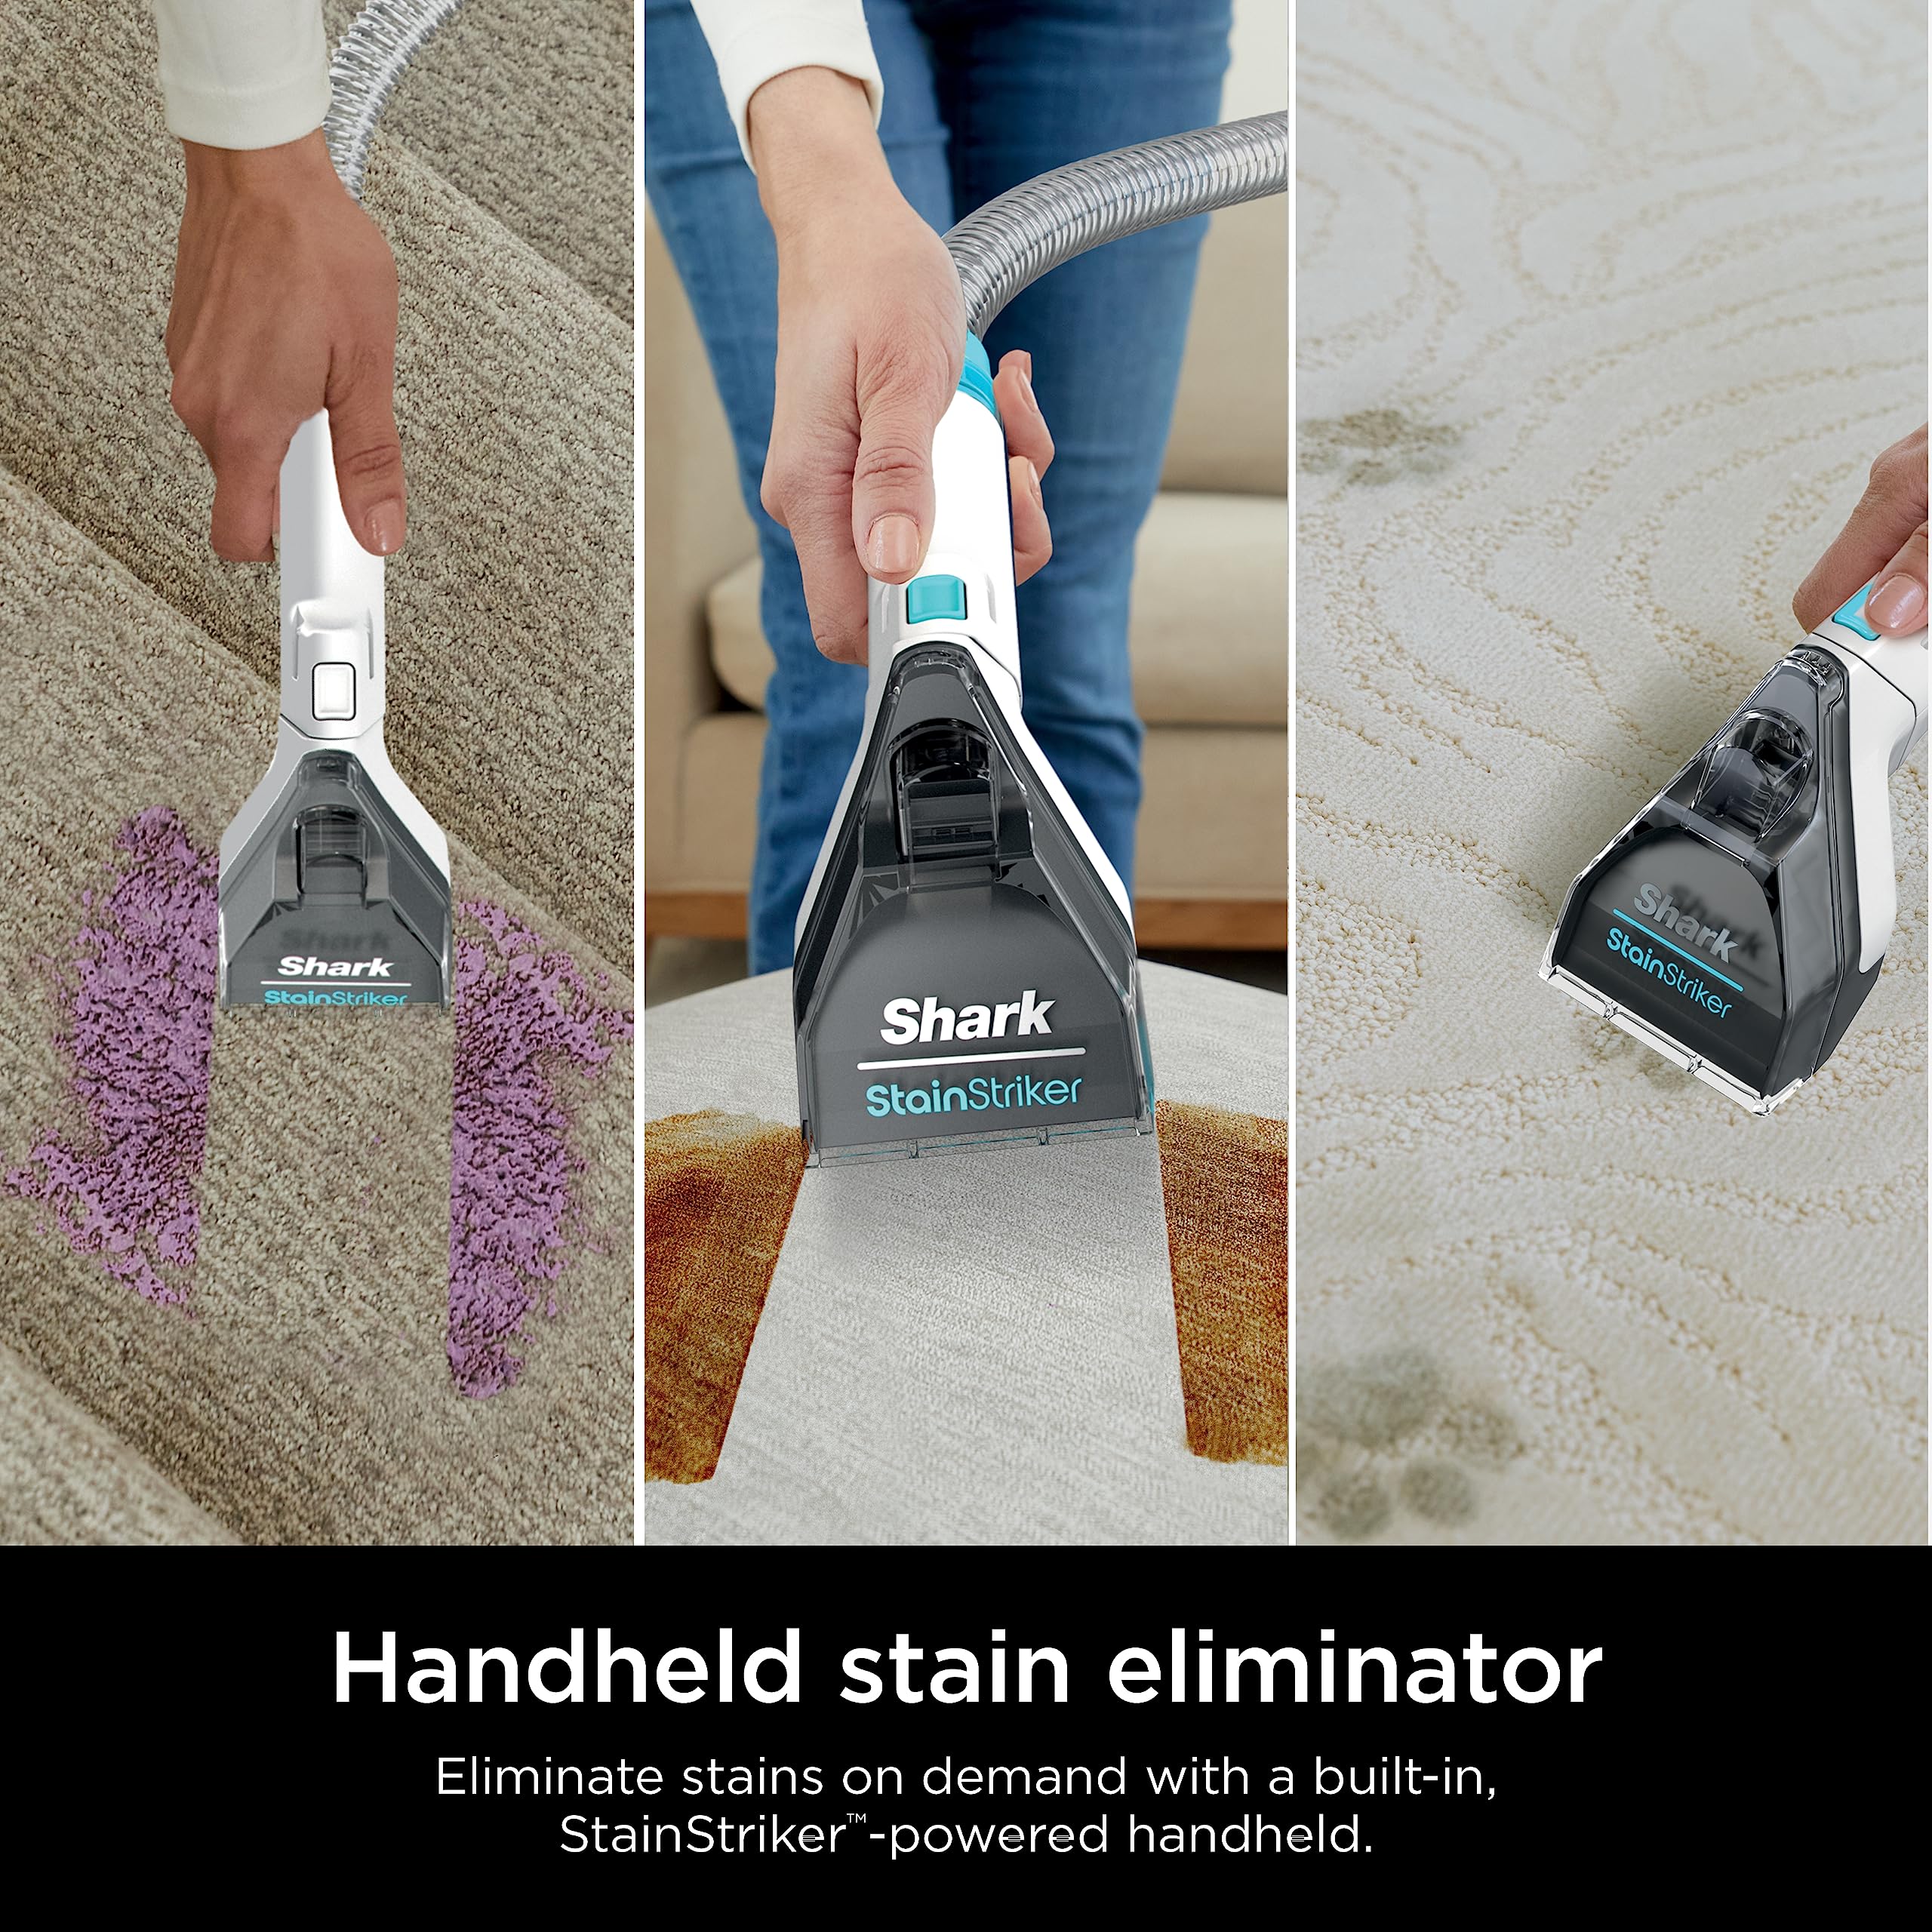 Shark EX201 CarpetXpert Upright Carpet, Area Rug & Upholstery Cleaner with StainStriker, Built-in Spot & Stain Cleaner, Perfect for Pets, Deep Cleaning & Tough Stain Removal, Carpet Shampooer, Teal